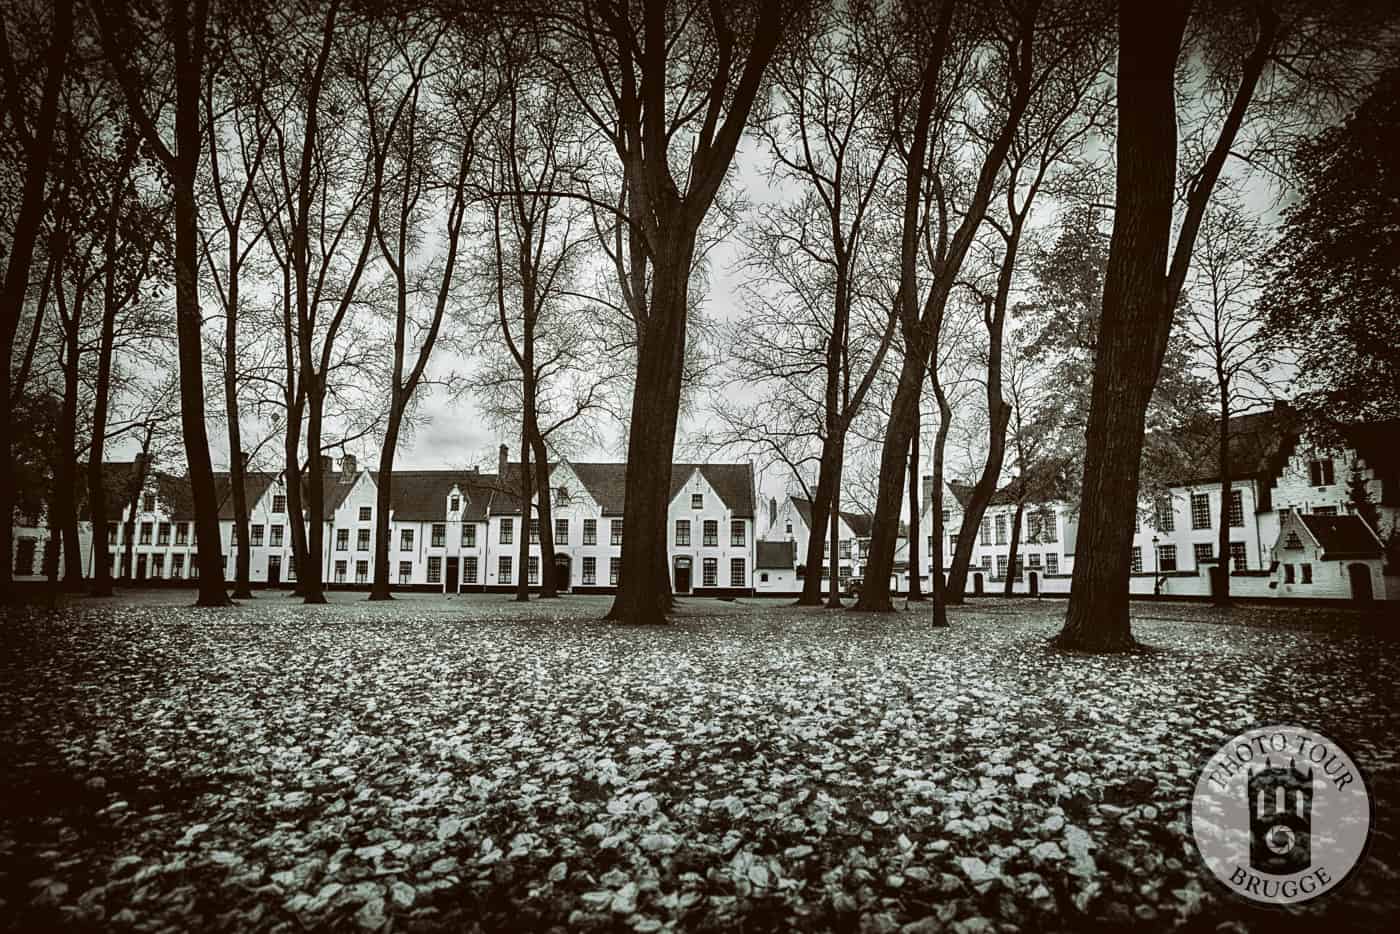 The beautiful Behijnhof (nunnery) of Bruges Belgium in fall, lovely rows of white houses with trees offering a new view with every season. Photo by Photo Tour Brugge.